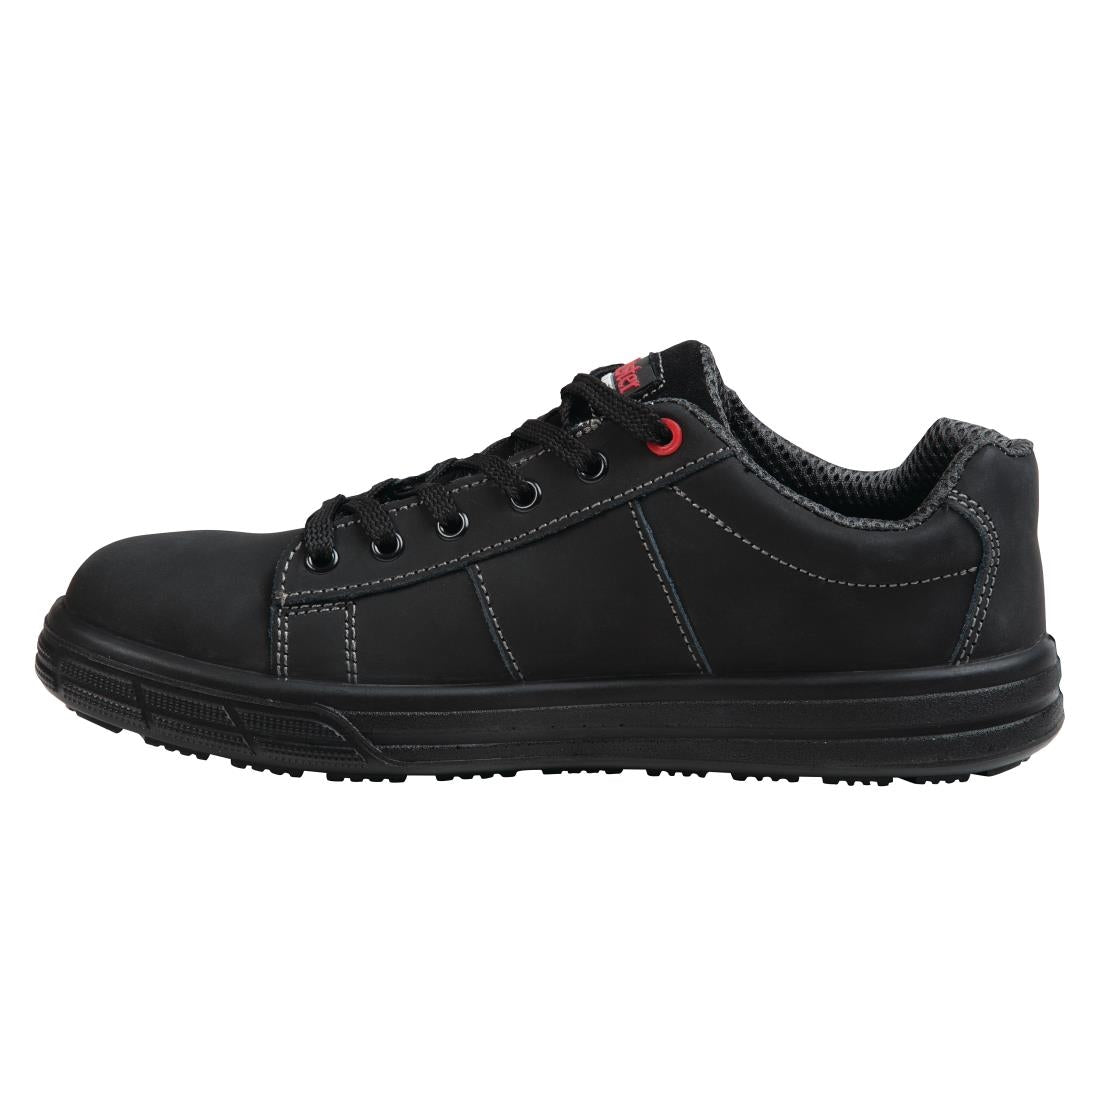 BB420-39 Slipbuster Safety Trainers Black 39